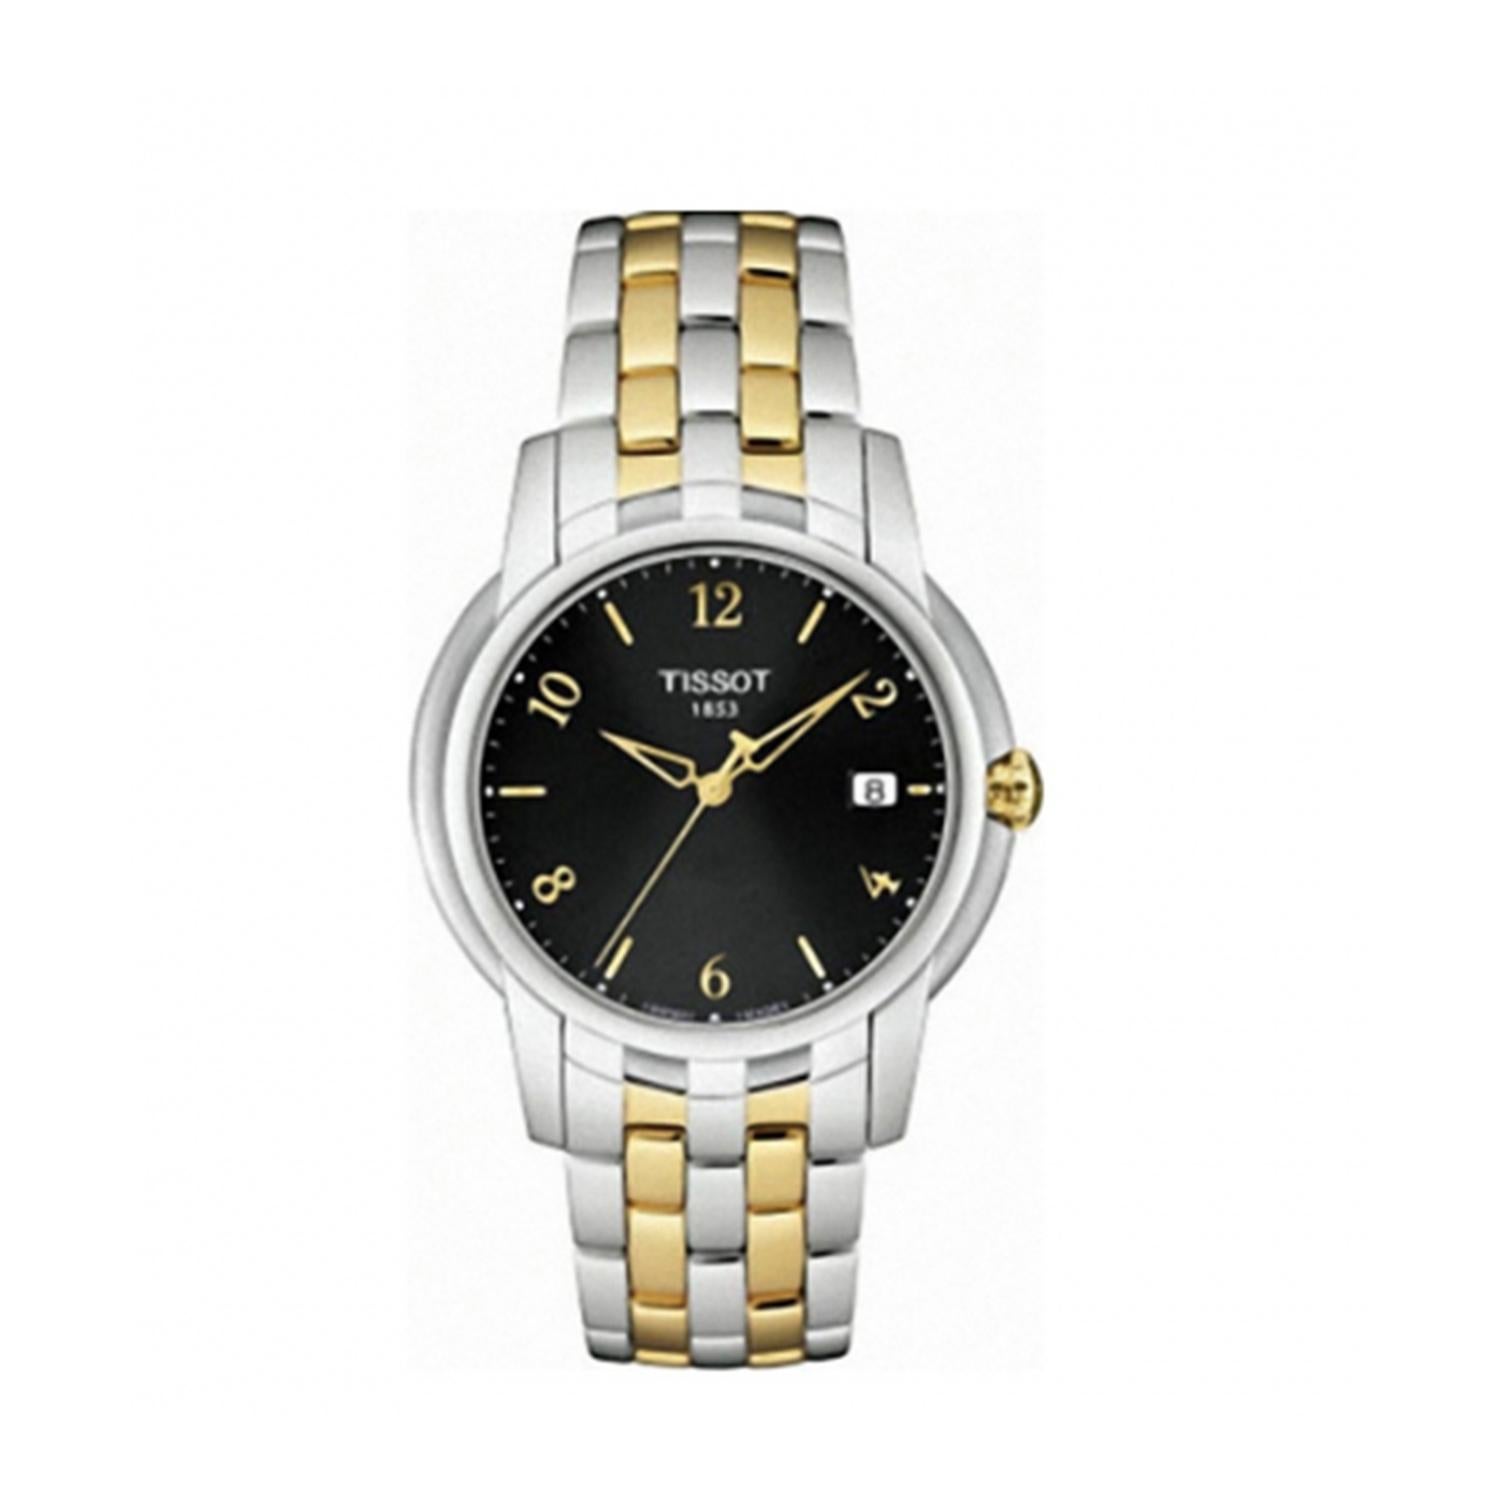 This display model Tissot Ballade  T97.2.481.52 is a beautiful men's timepiece that is powered by quartz (battery) movement which is cased in a stainless steel case. It has a round shape face,  dial, and has hand Arabic numerals style markers. It is